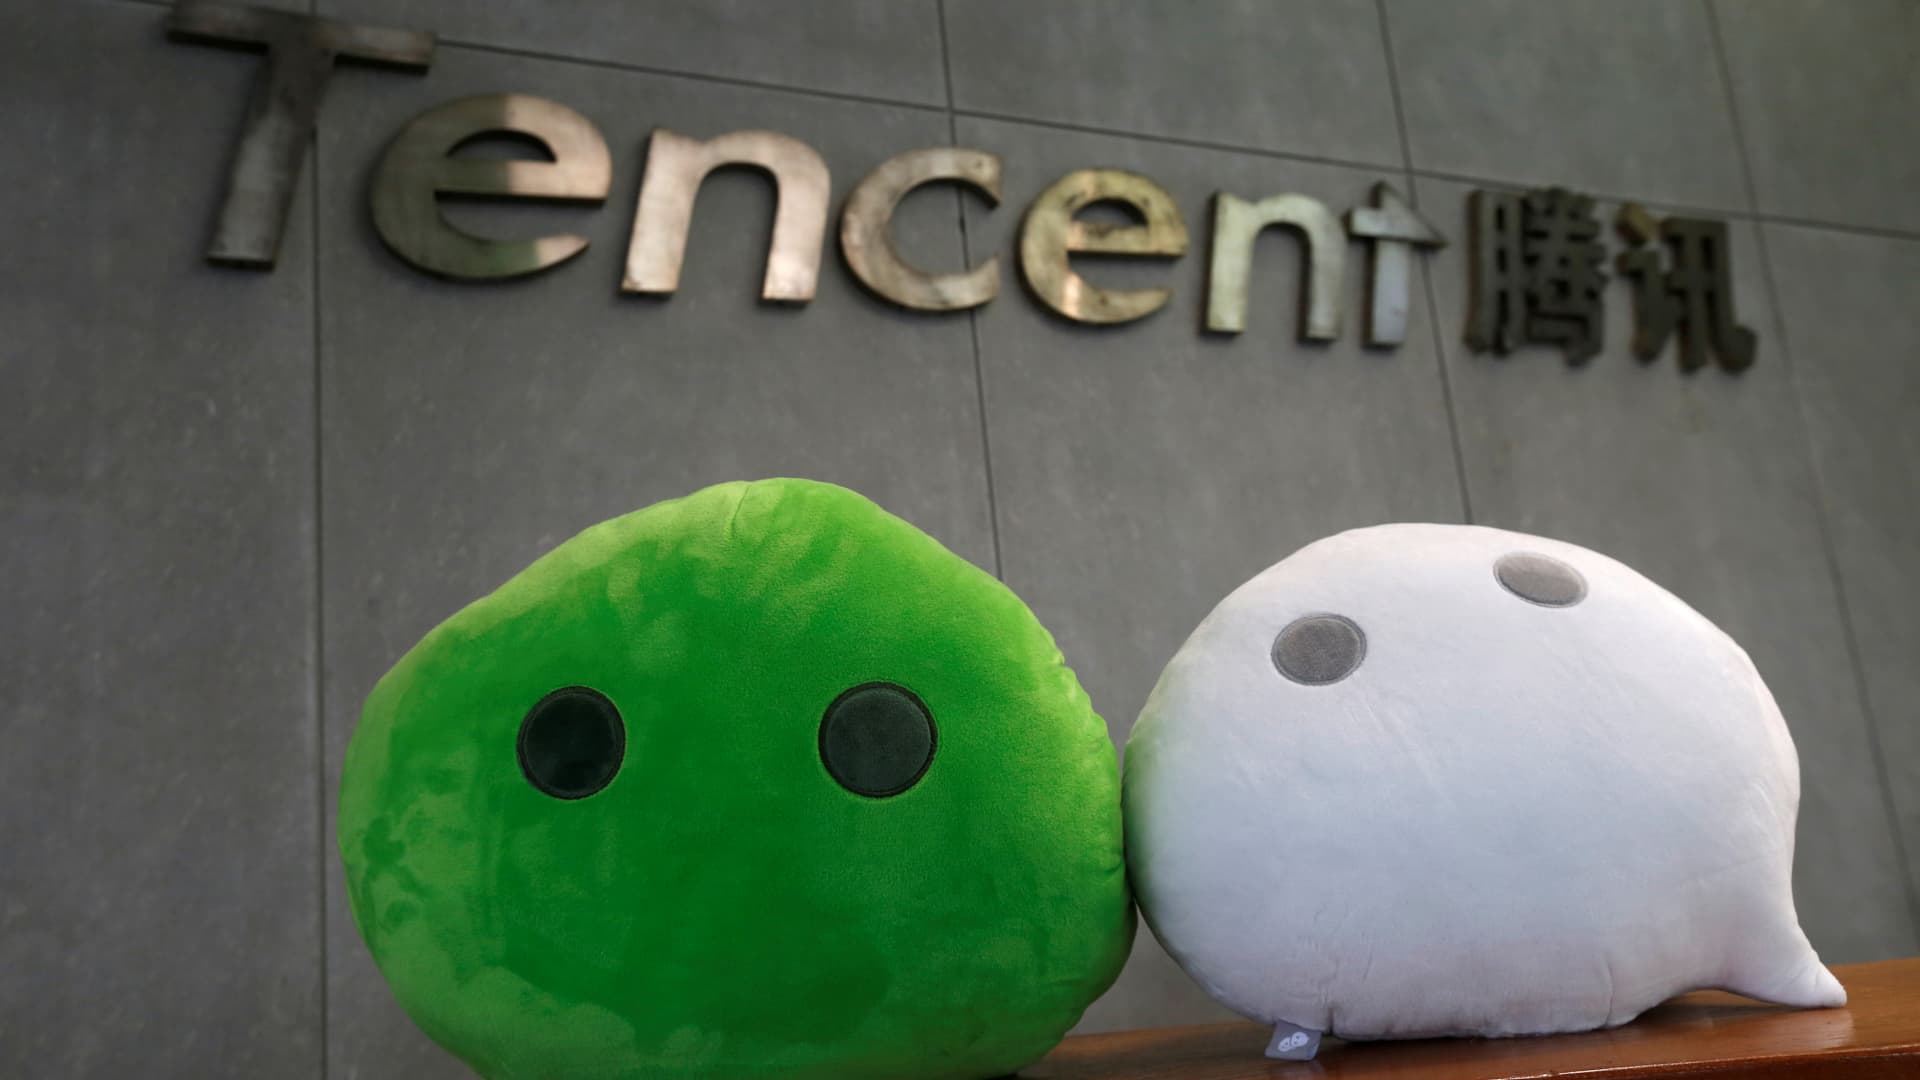 tencent-posts-fastest-profit-growth-in-3-years-as-online-ads,-business-services-offset-slower-gaming